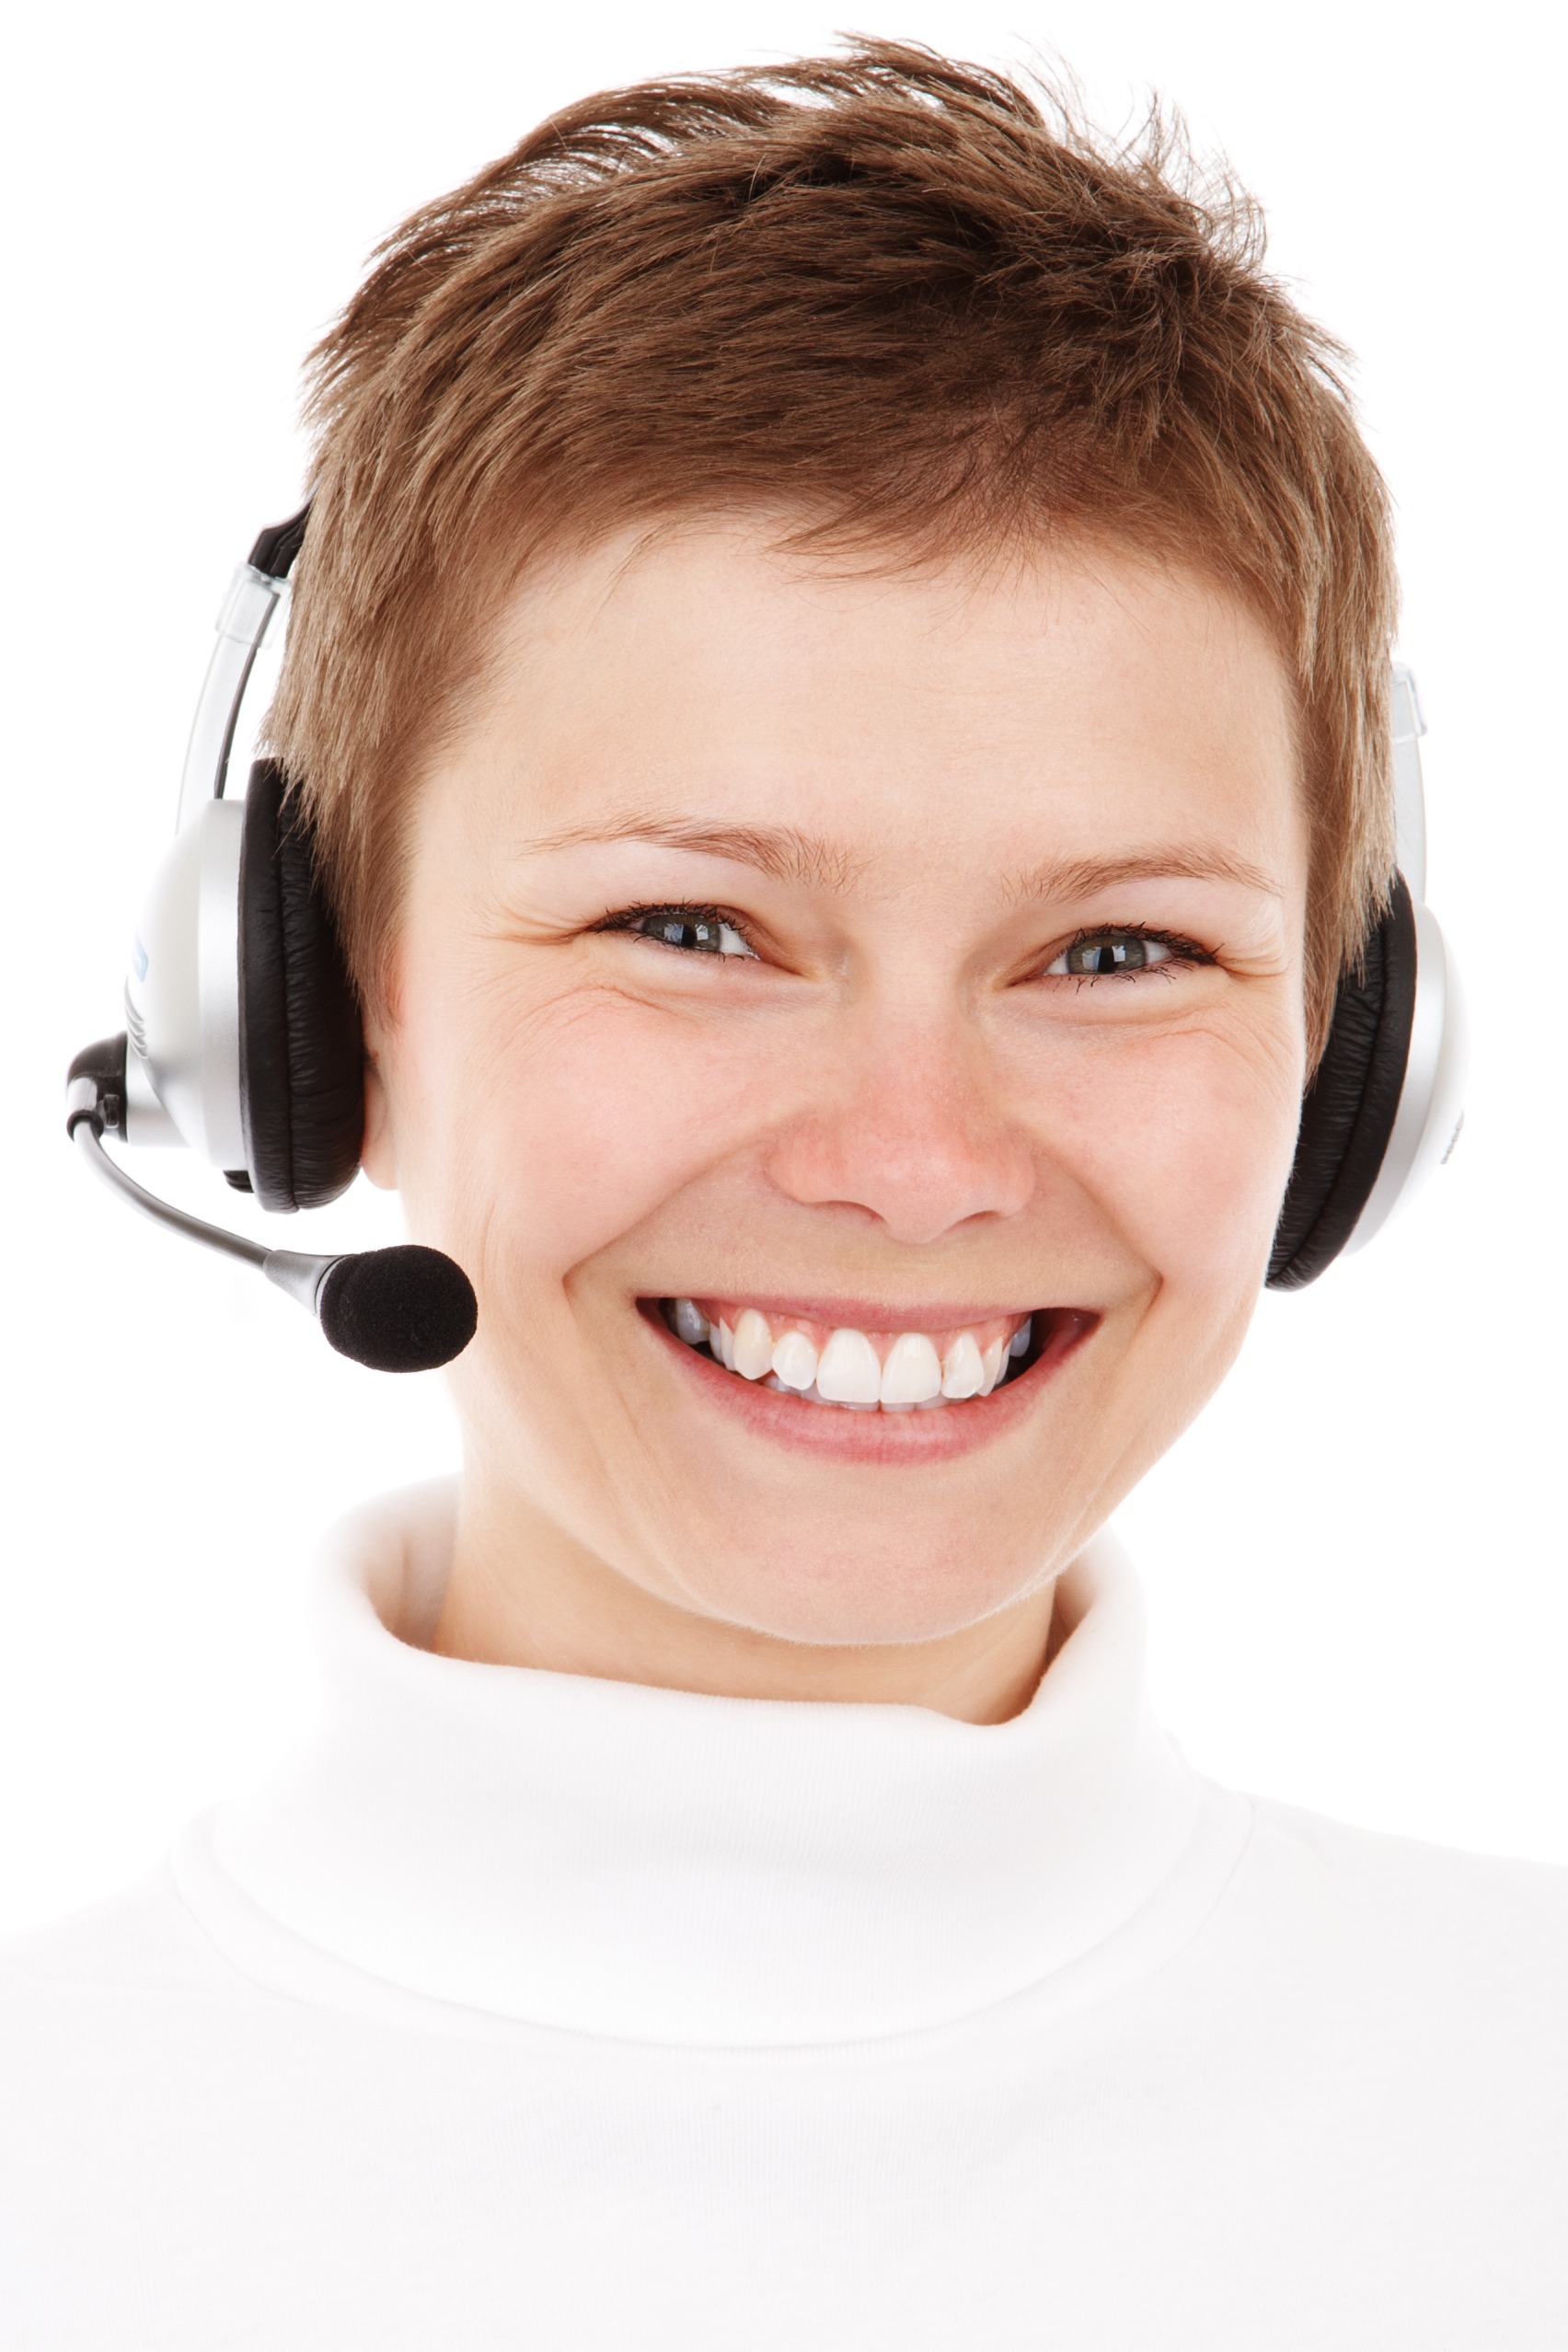 person wearing white top smiling for photo, agent, business, call